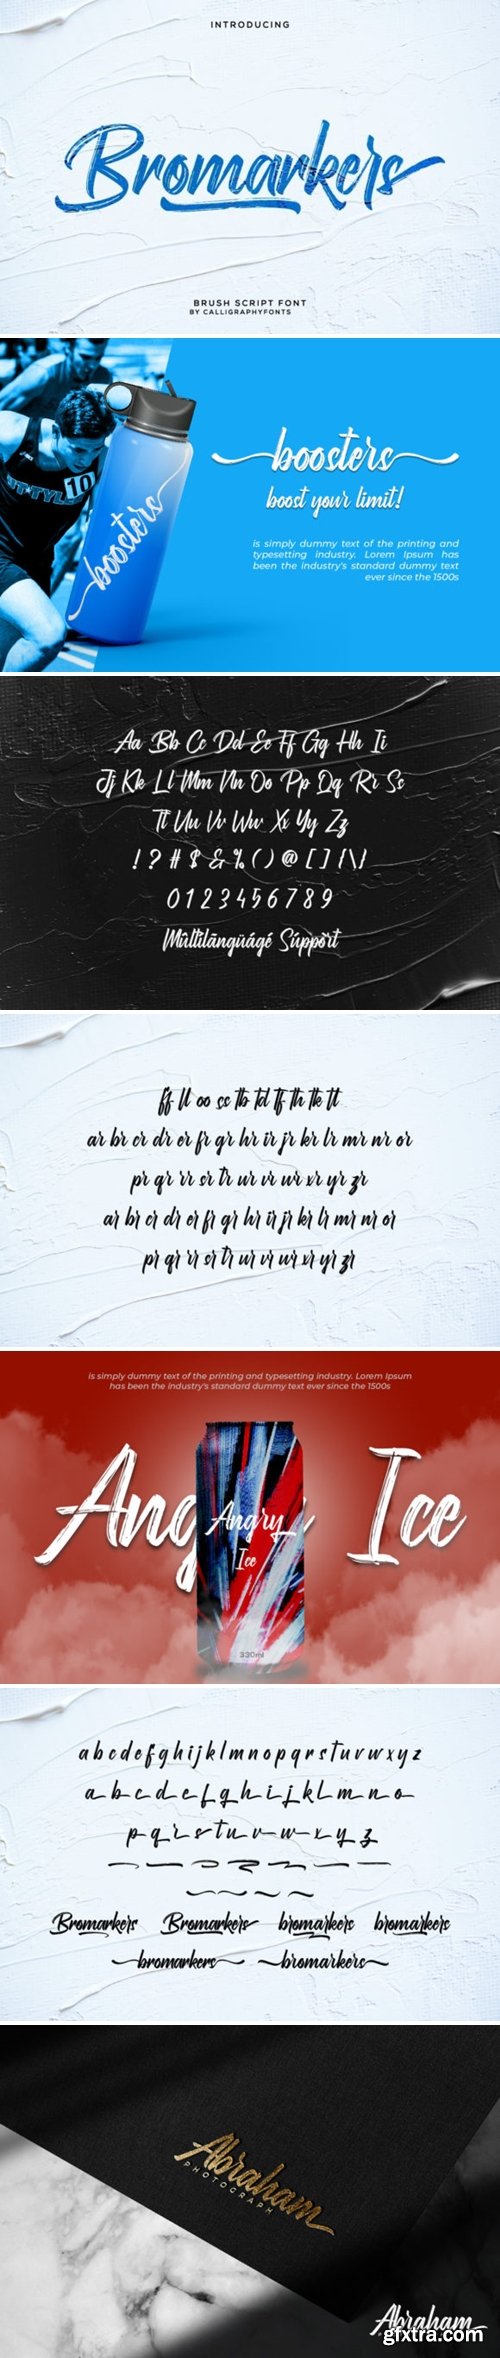 Bromarkers Font